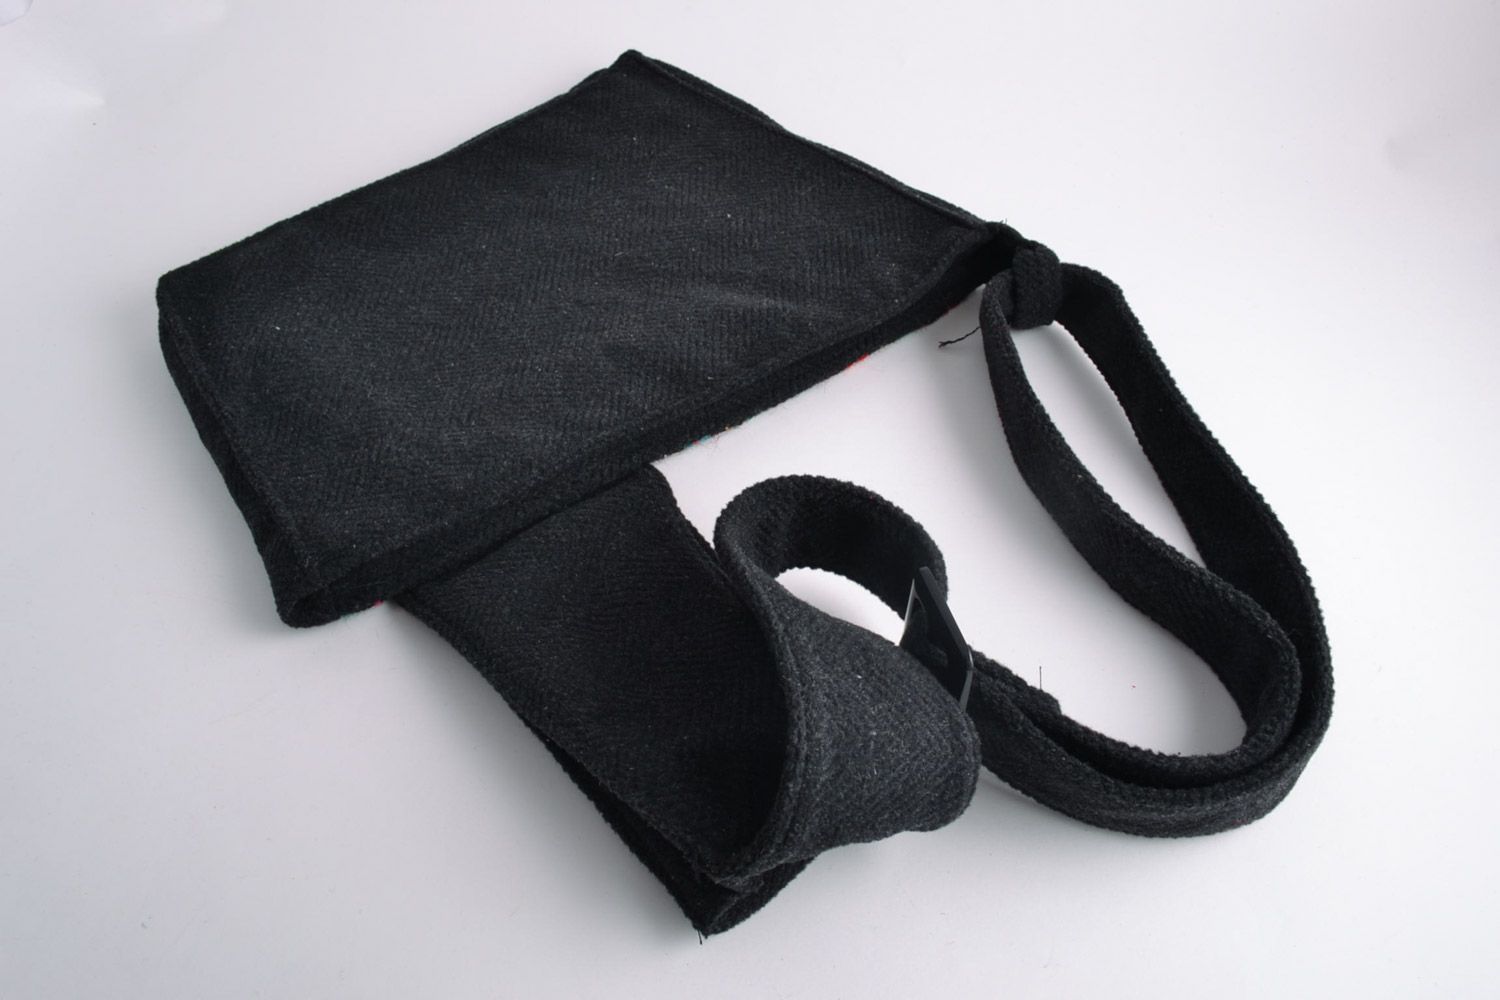 Handmade woolen fabric handbag with long handle in casual style for women photo 4